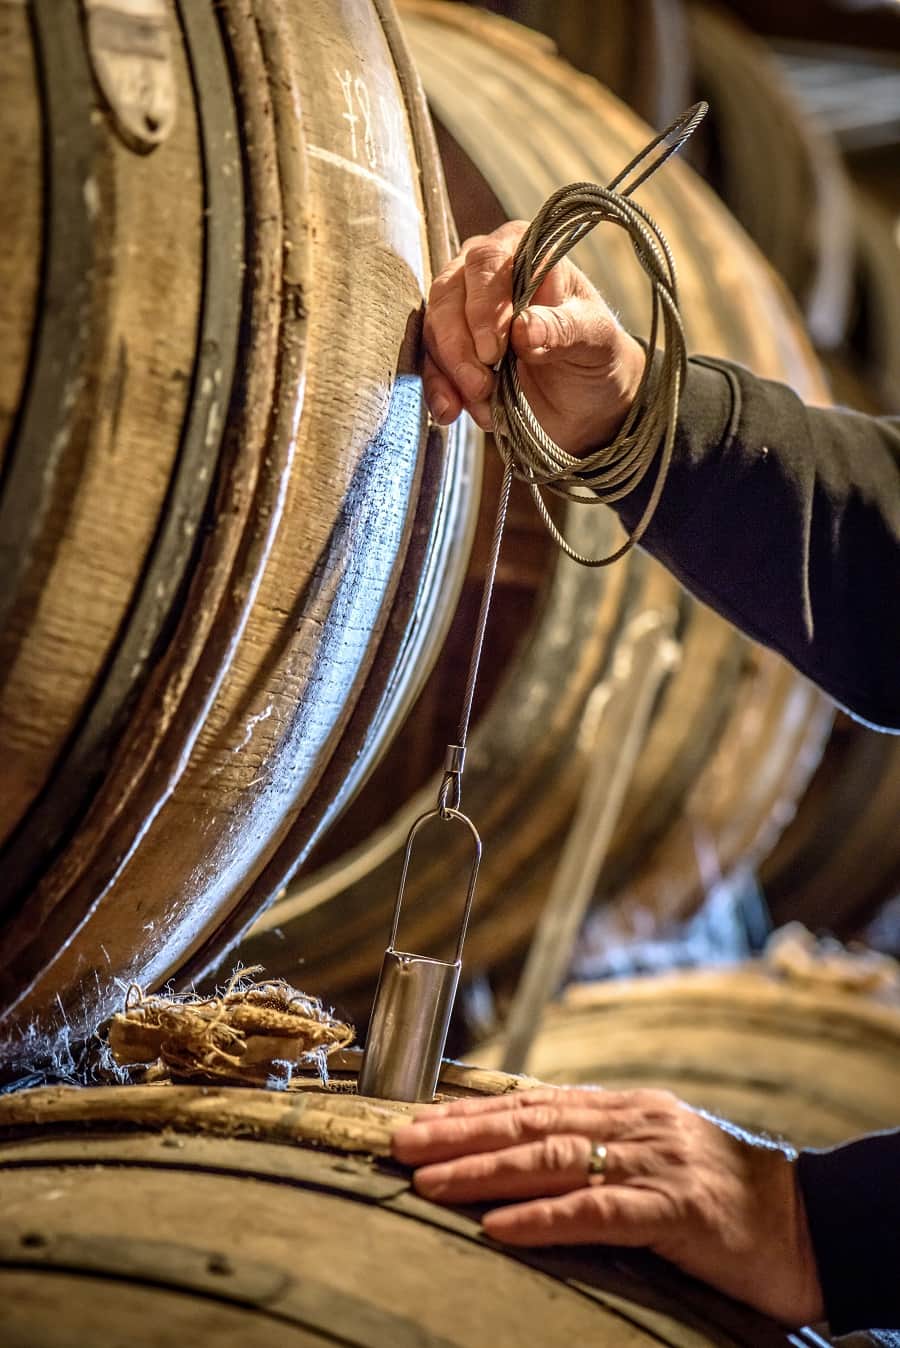 Cognac being checked when maturing in the oak barrel